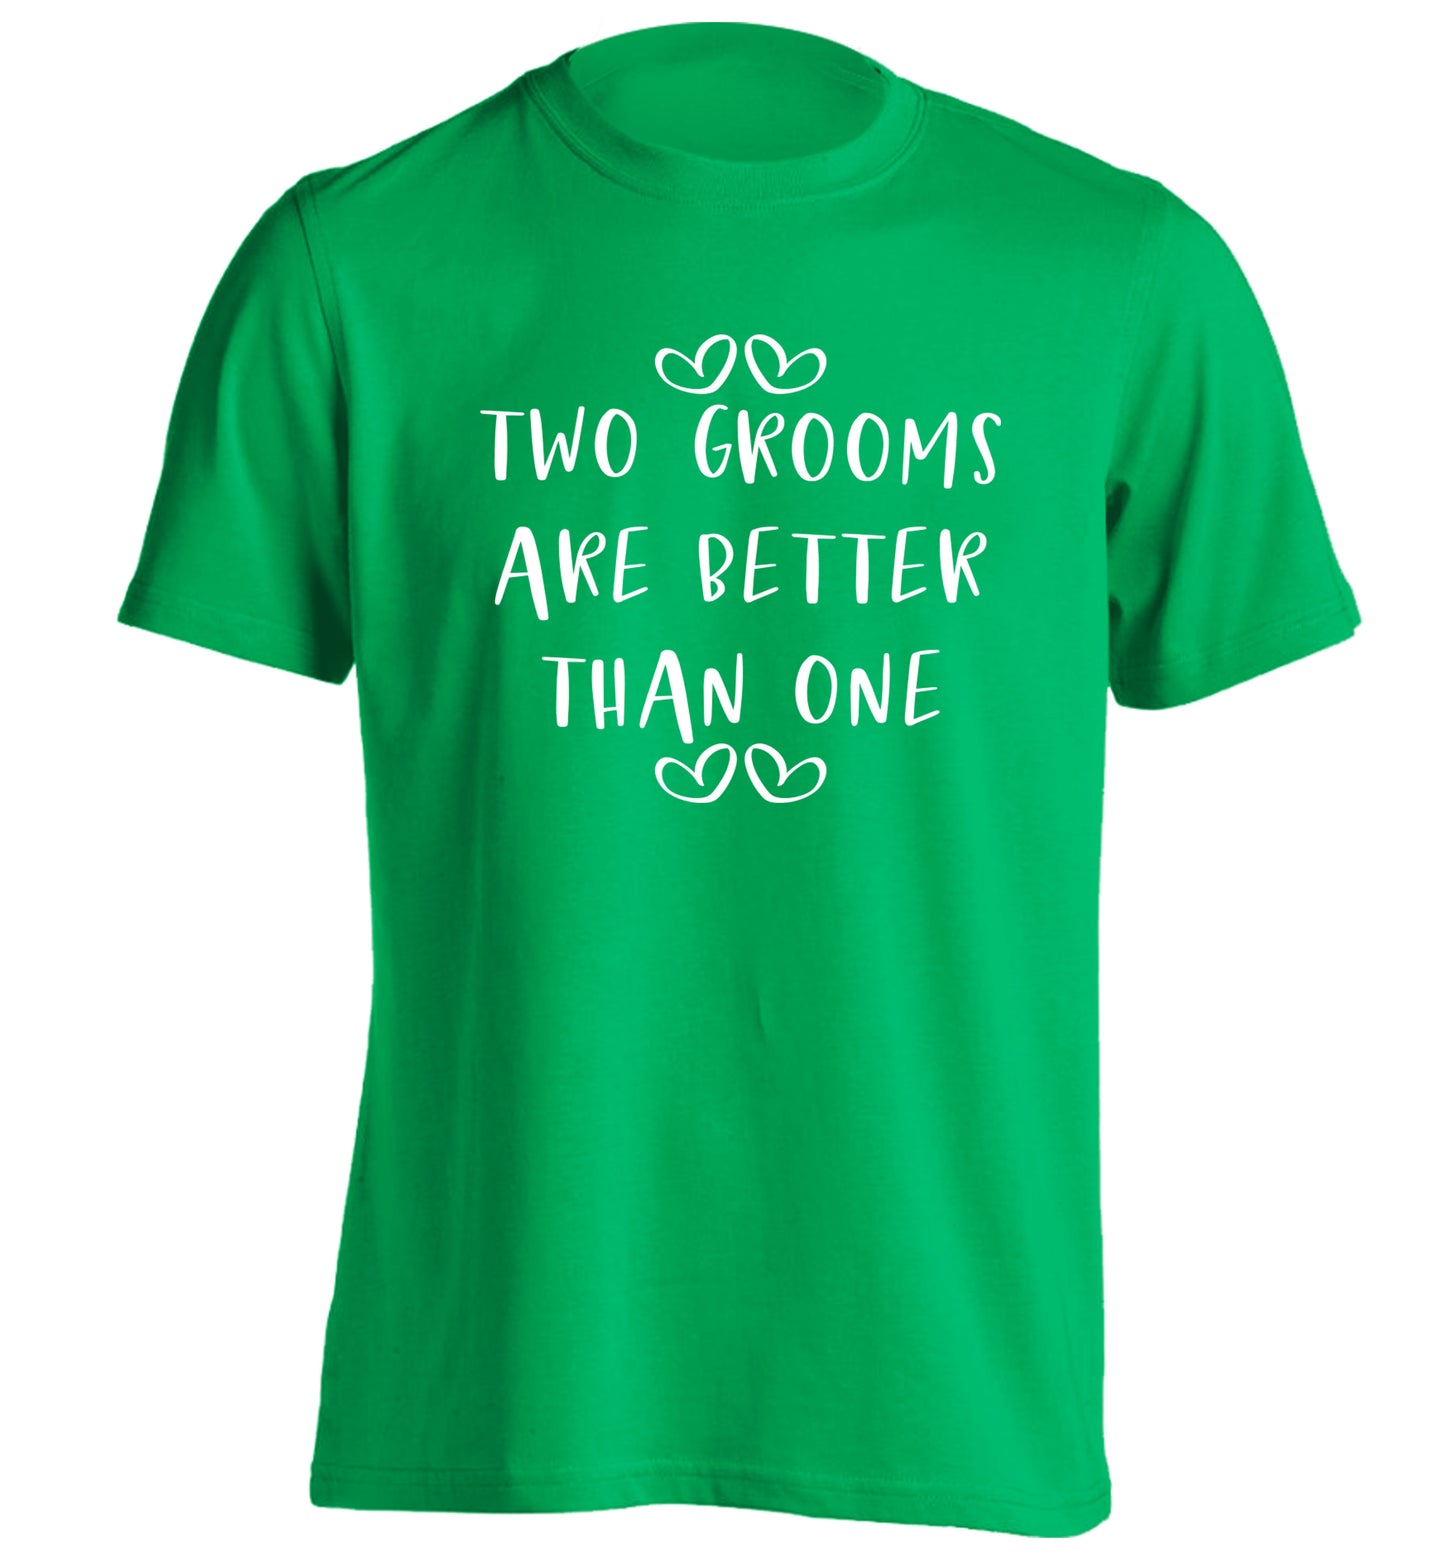 Two grooms are better than one adults unisex green Tshirt 2XL